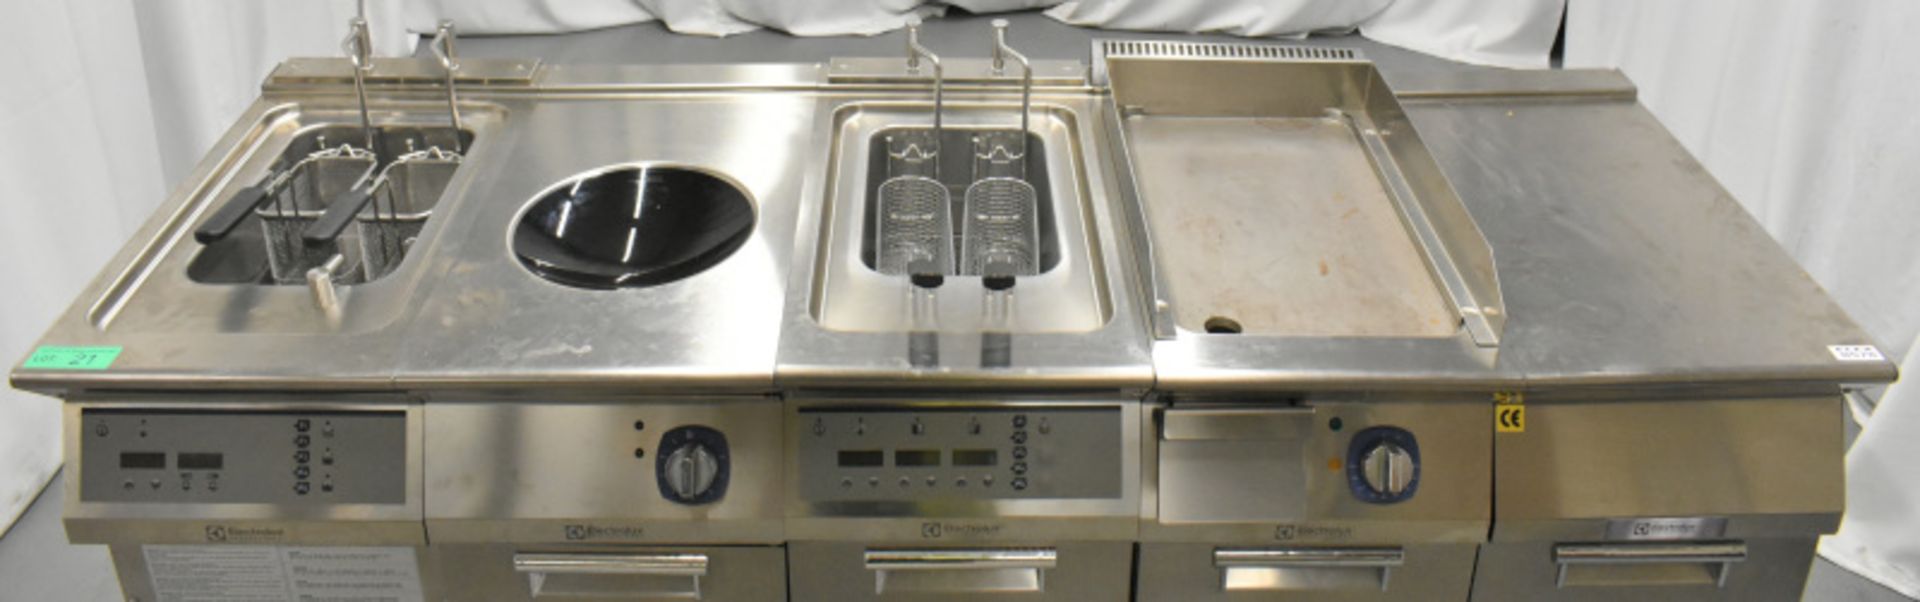 Electrolux Professional Catering Station - Image 2 of 23